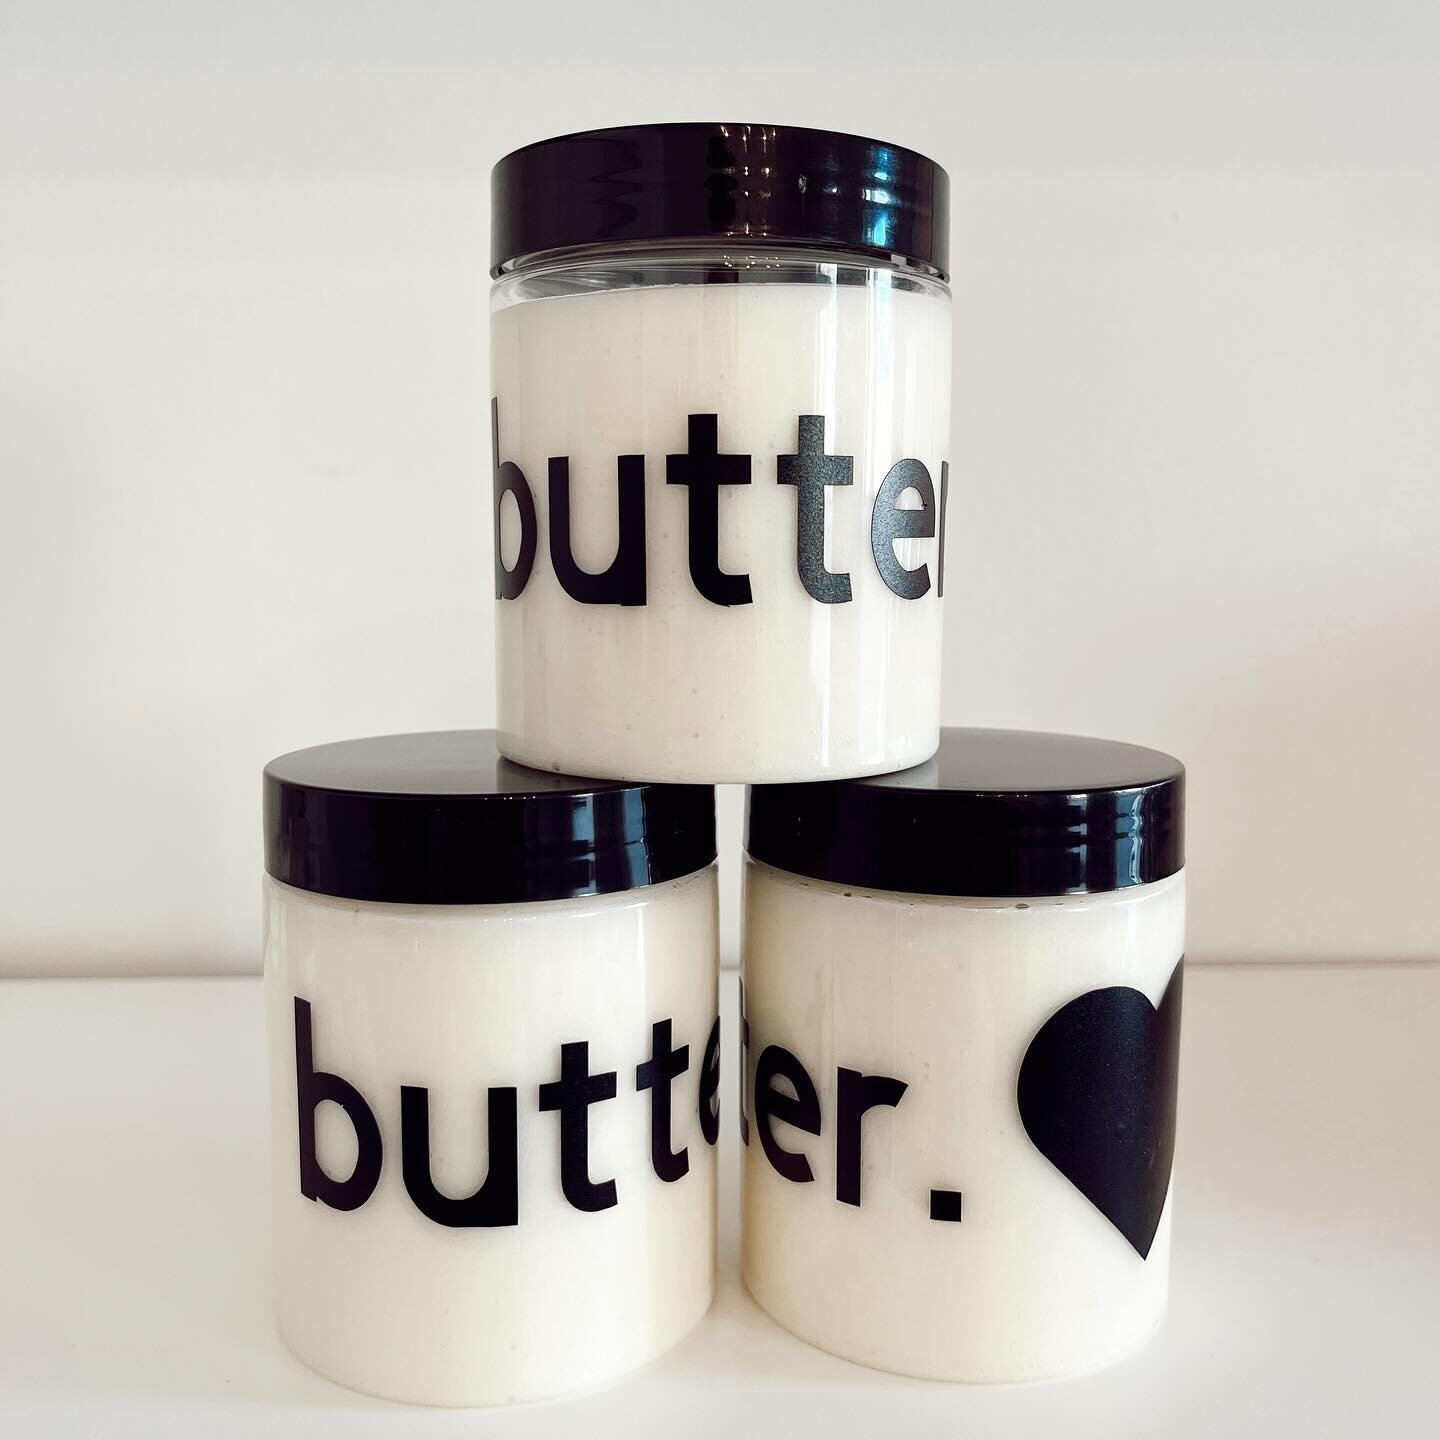 Body butters now available in shop and online. I re-formulated an old fave and I&rsquo;m sooo happy with the outcome. The texture is like softened butter and the smell is like freshly baked pie✨

✨I&rsquo;ve added lemon, bergamot, sweet orange and va